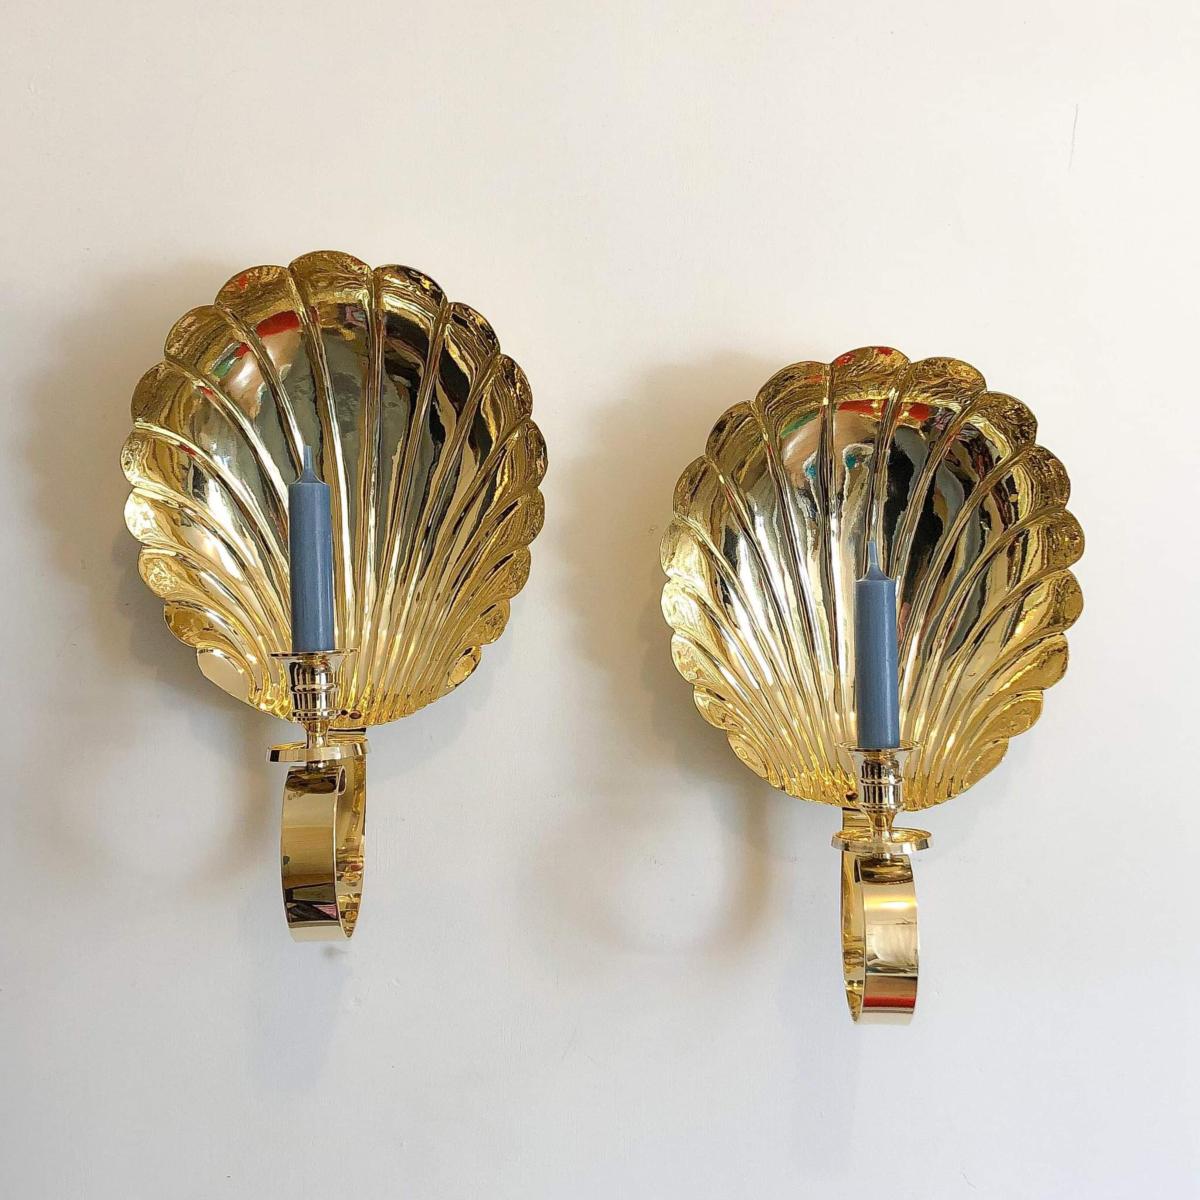 Brass Scallop Candle Sconce, medium, Pair, Offer